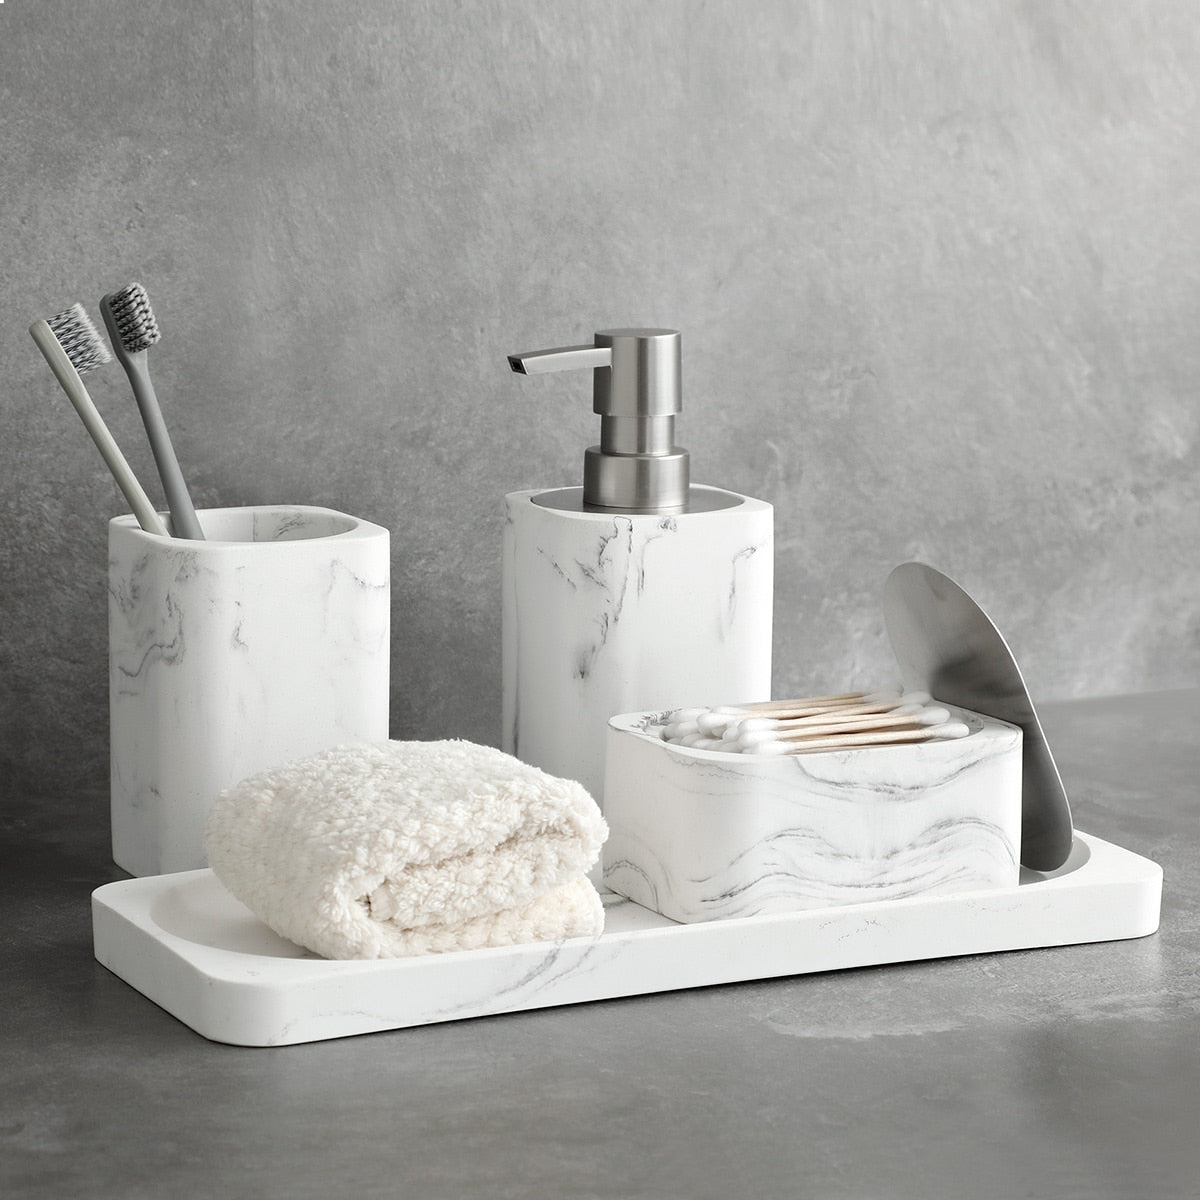 White Marble Bathroom Accessories freeshipping - khollect